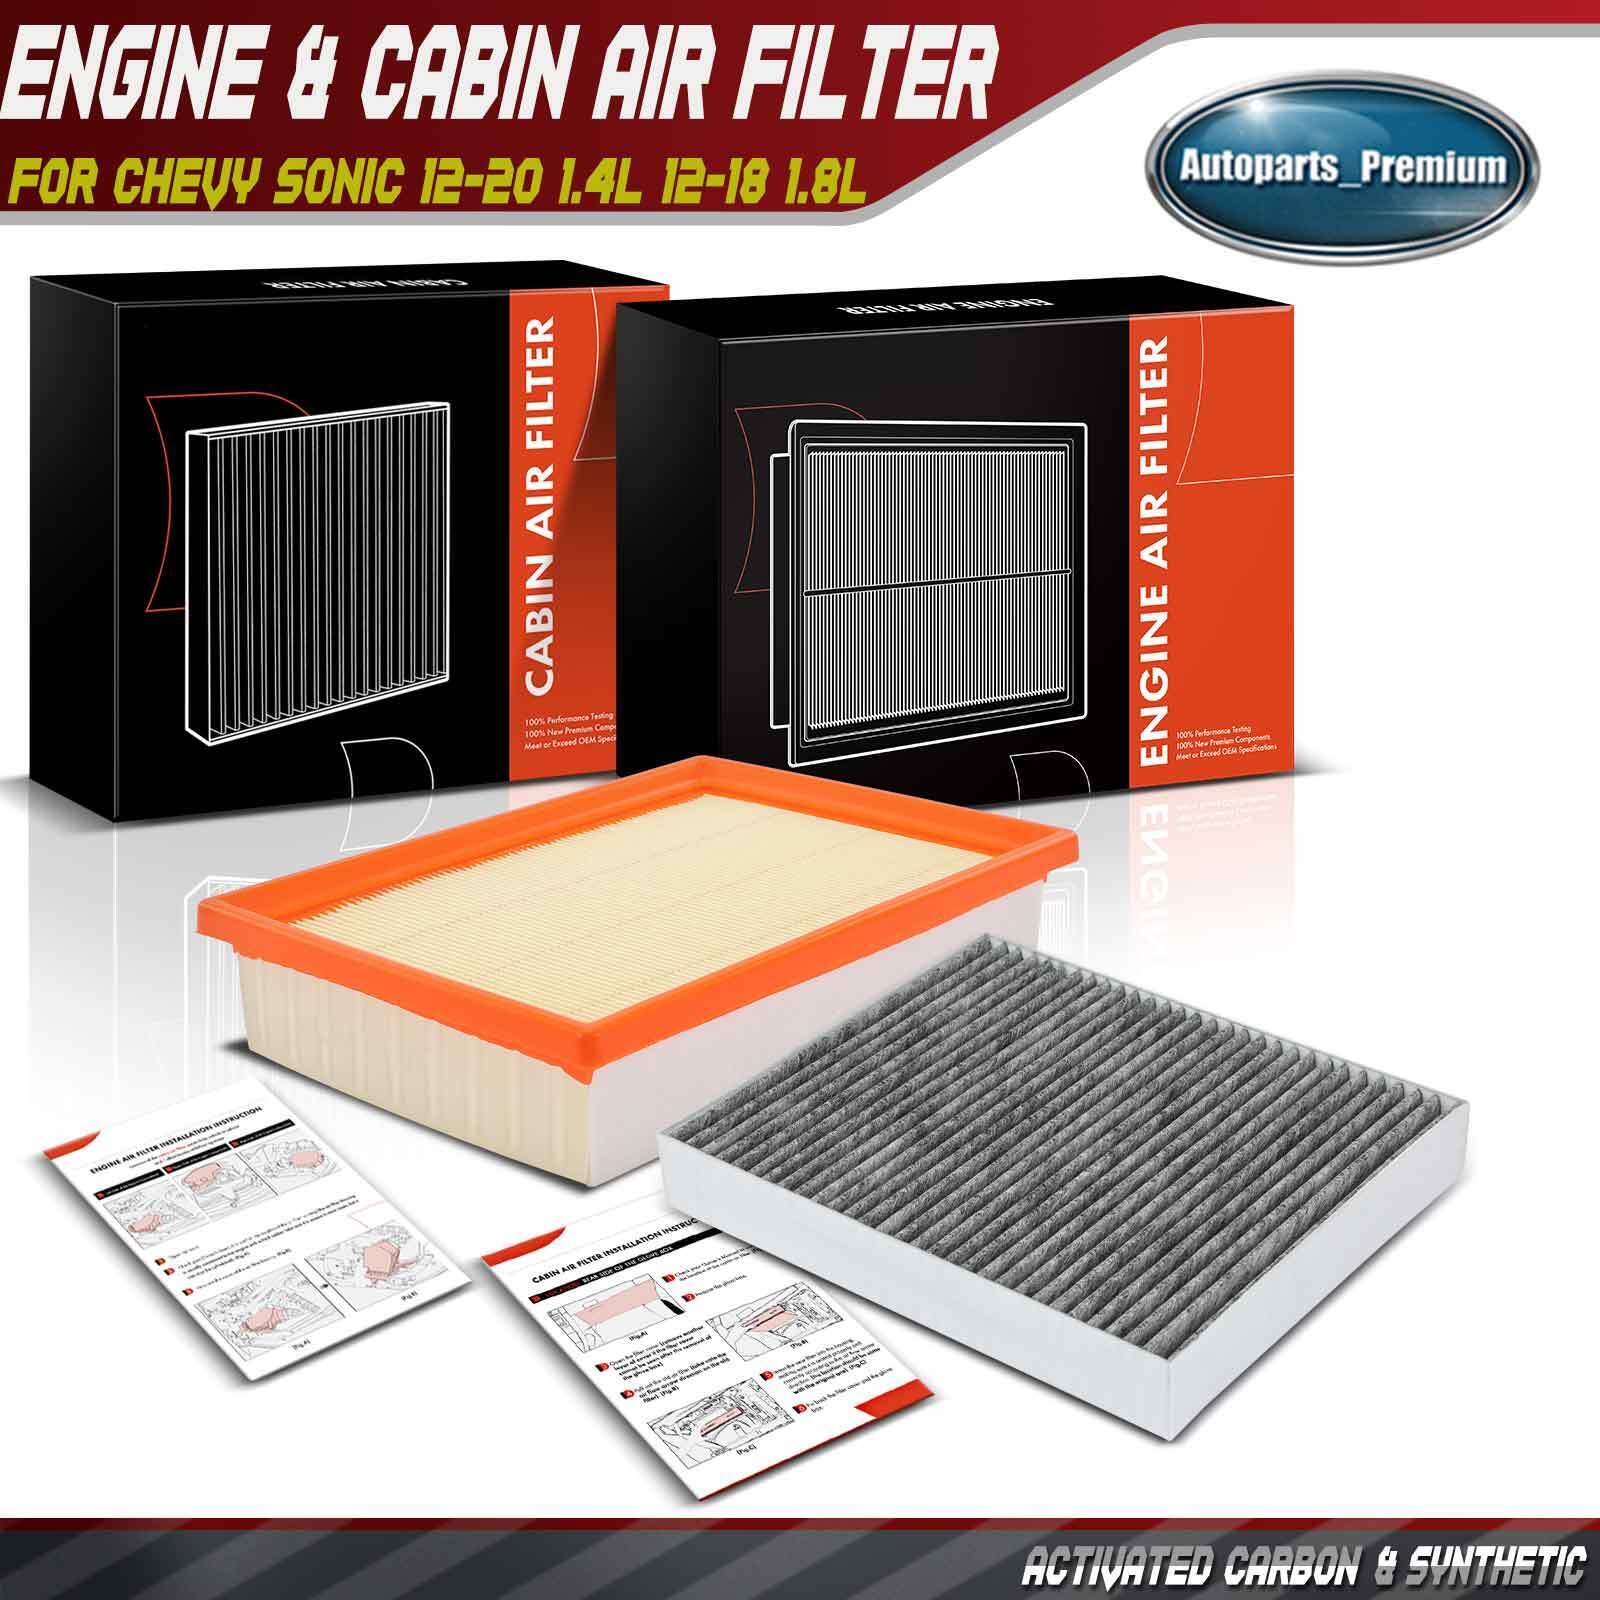 Engine & Cabin Air Filter for Chevrolet Sonic 2012-2020 1.4L 2012-2018 1.8L